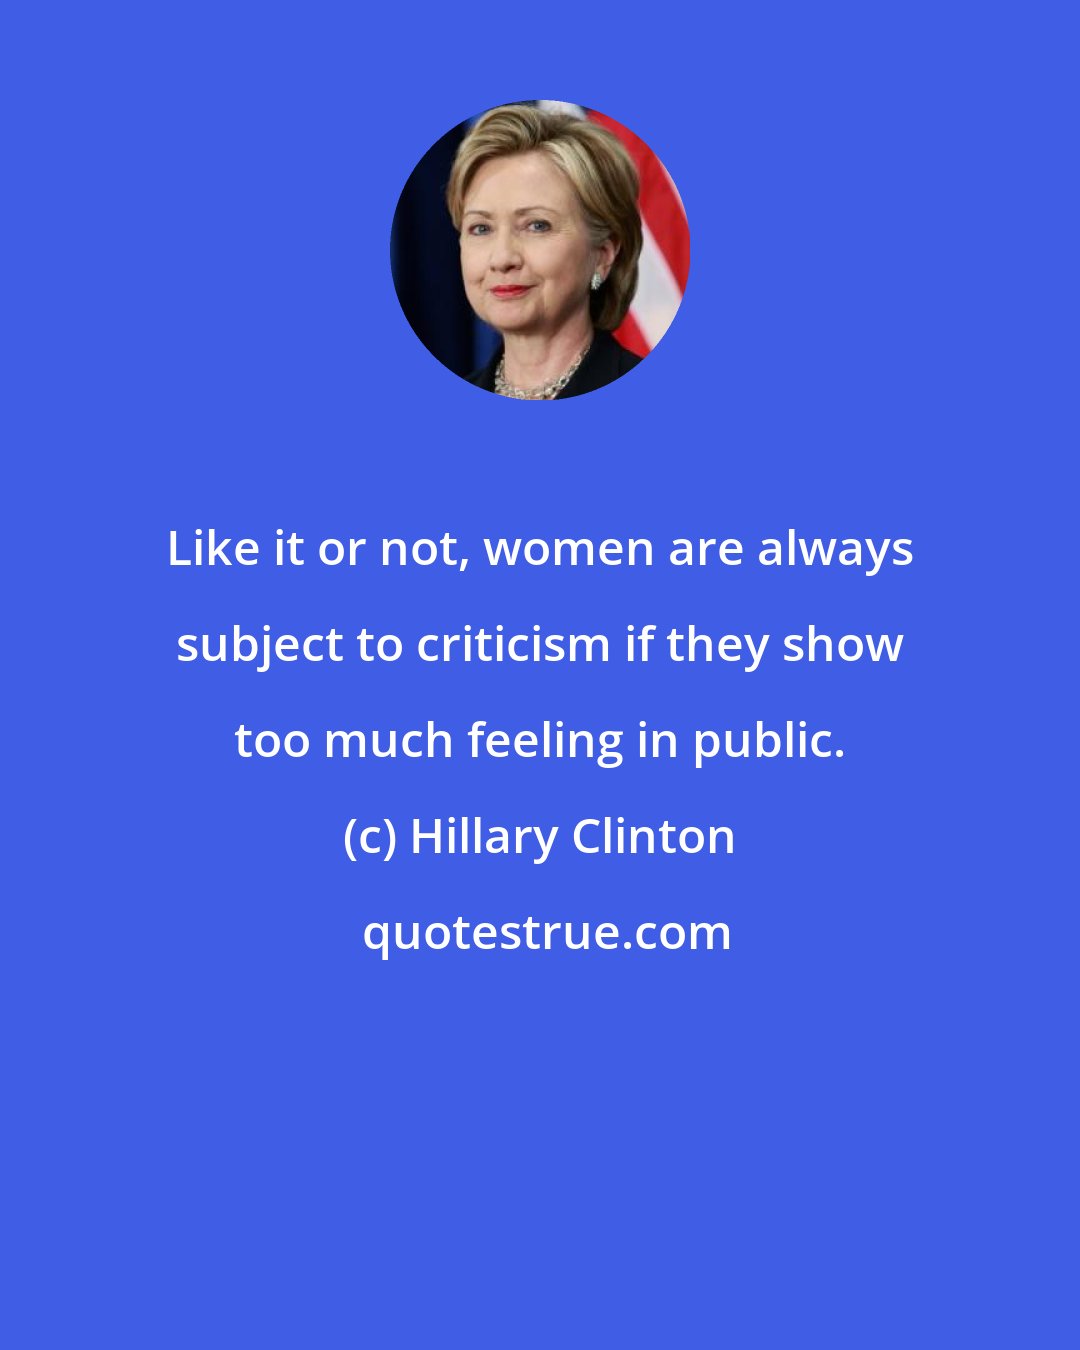 Hillary Clinton: Like it or not, women are always subject to criticism if they show too much feeling in public.